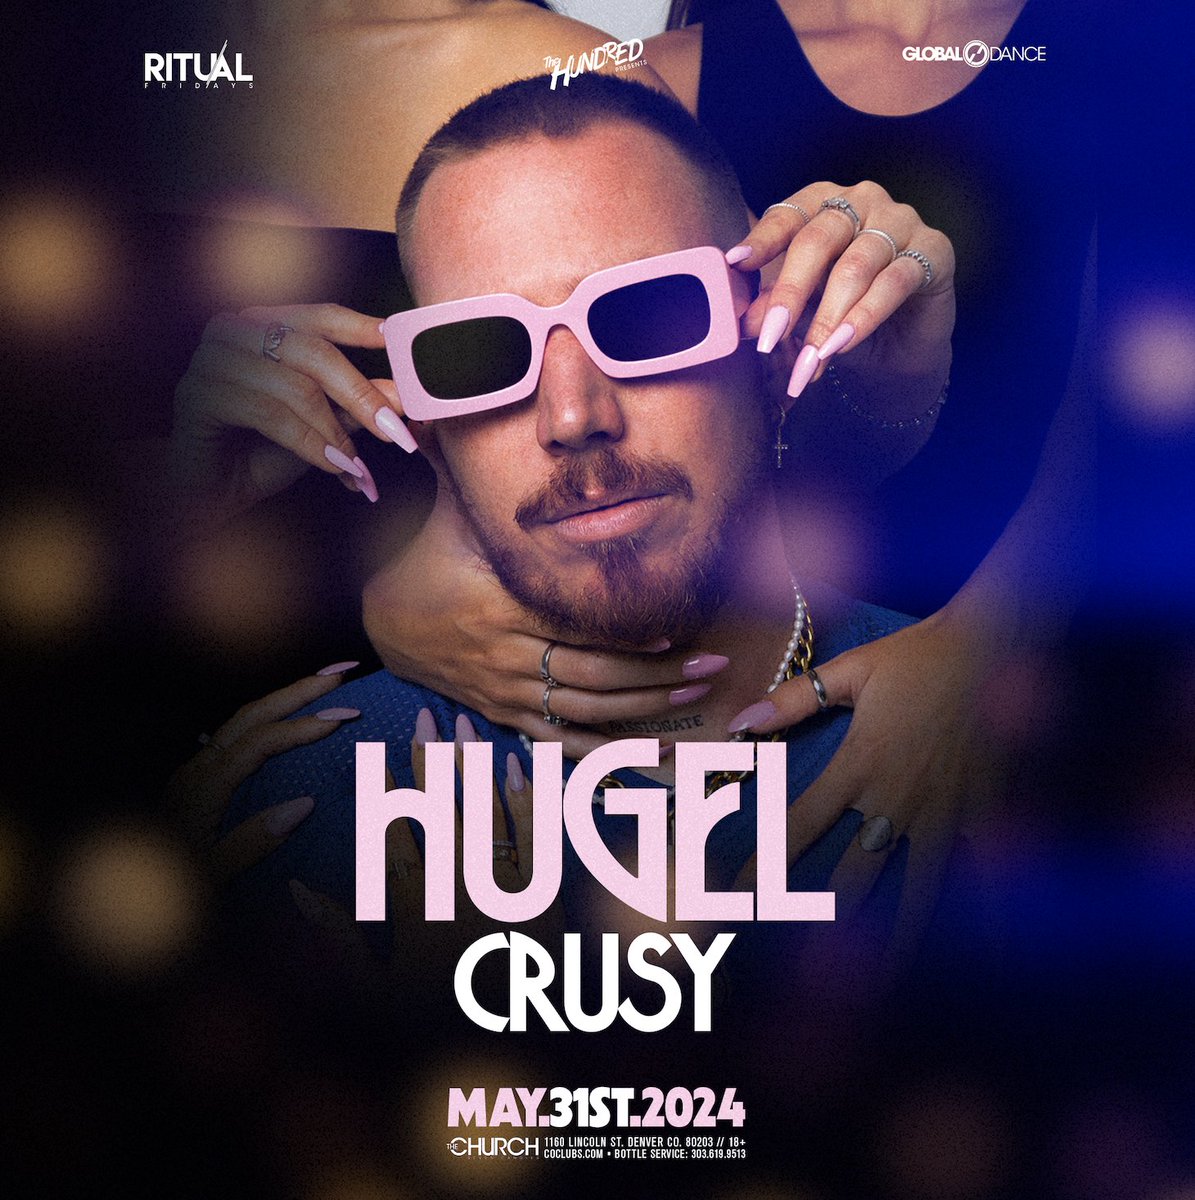 🚨 JUST ANNOUNCED! 🚨 Marseille’s @HUGELTHUG brings his latin-infused burning club releases to Denver with a #RitualFridays takeover May 31st at The Church 🥁💃 On sale now! Lock in your tickets here >> bit.ly/RITUAL-HUGEL